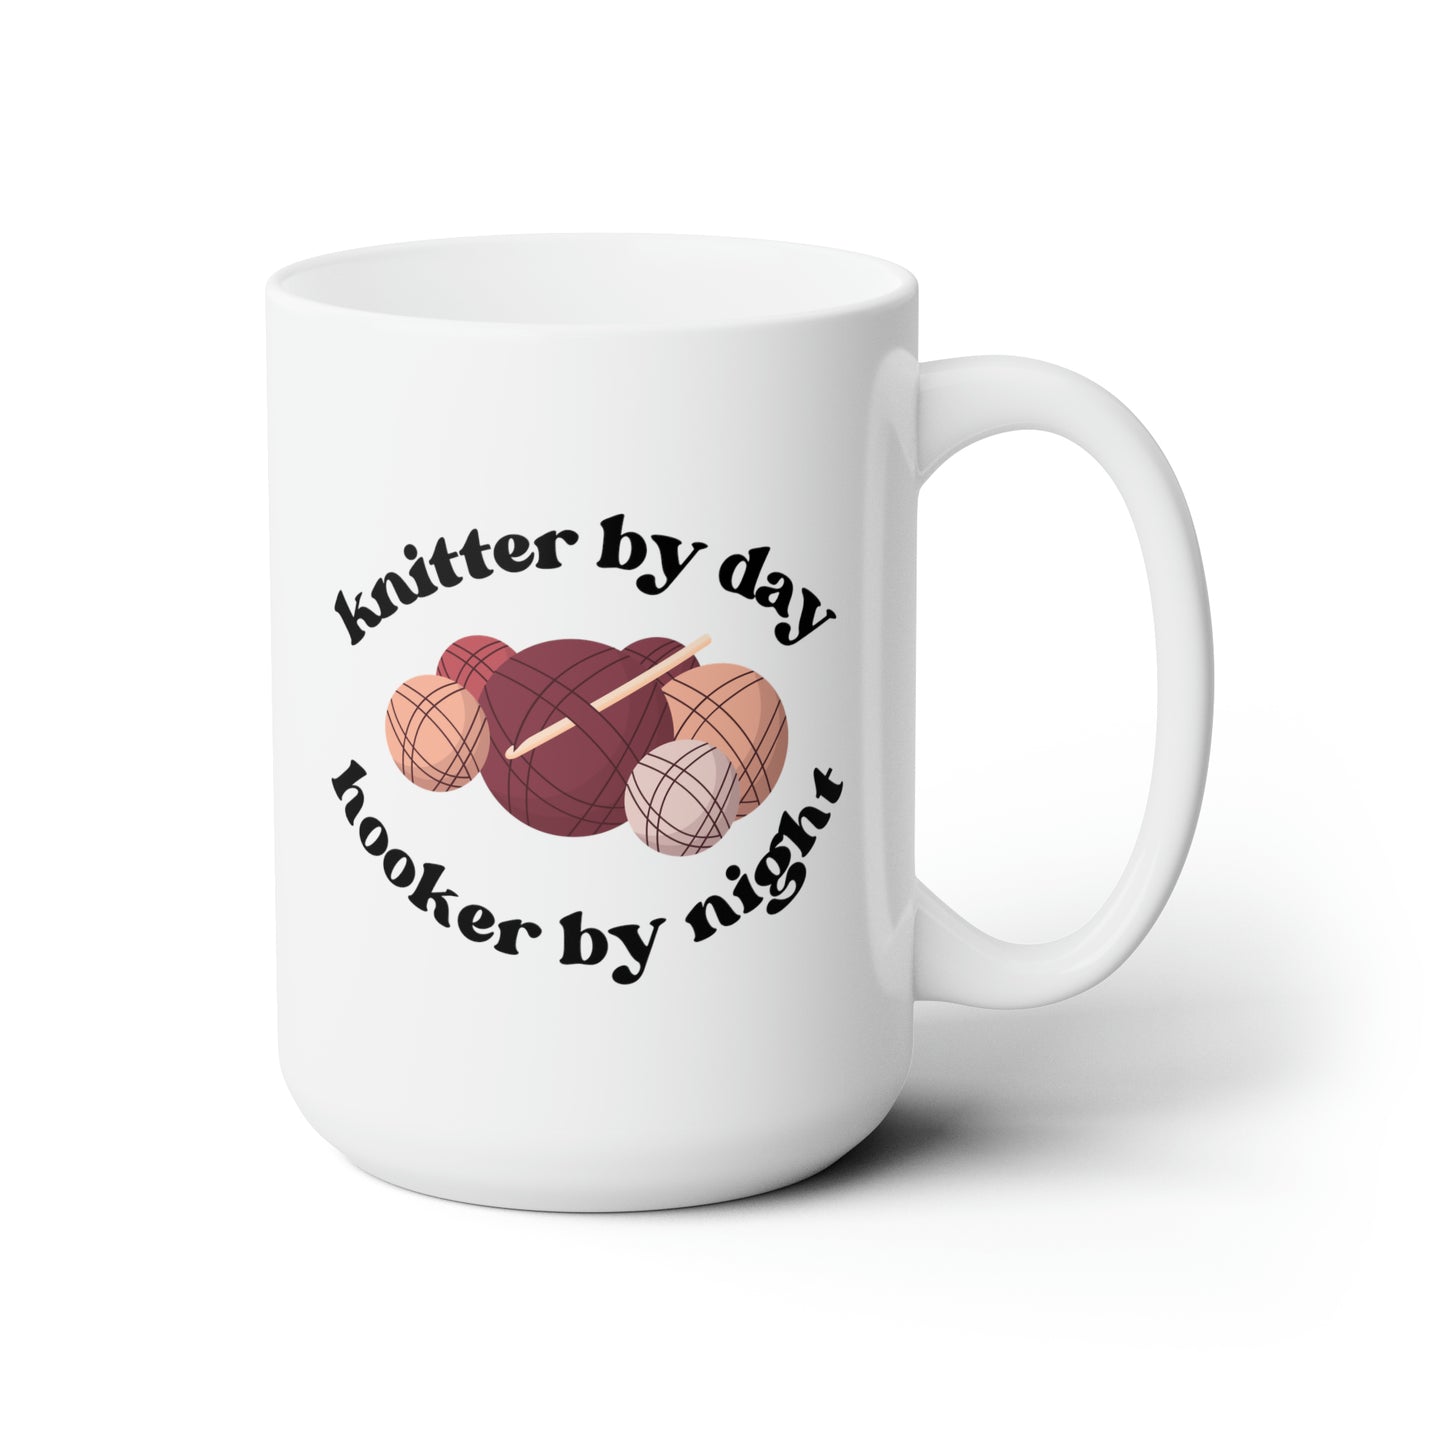 Knitter By Day Hooker By Night 15oz white funny large coffee mug gift for mom mother's day wool knitting novelty rude joke waveywares wavey wares wavywares wavy wares